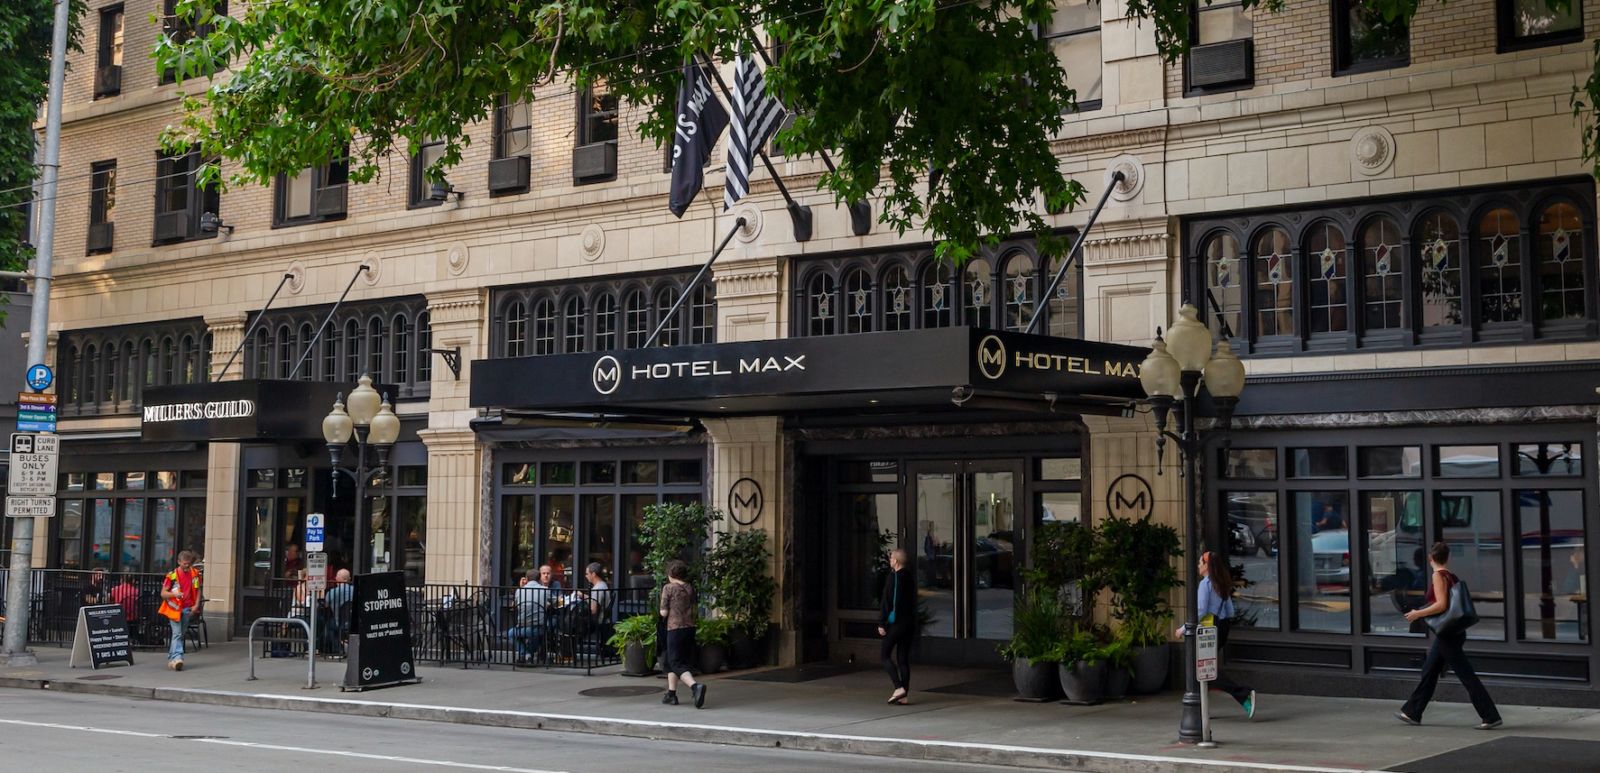 Hotel Max in Seattle. Photo by Shutterstock.